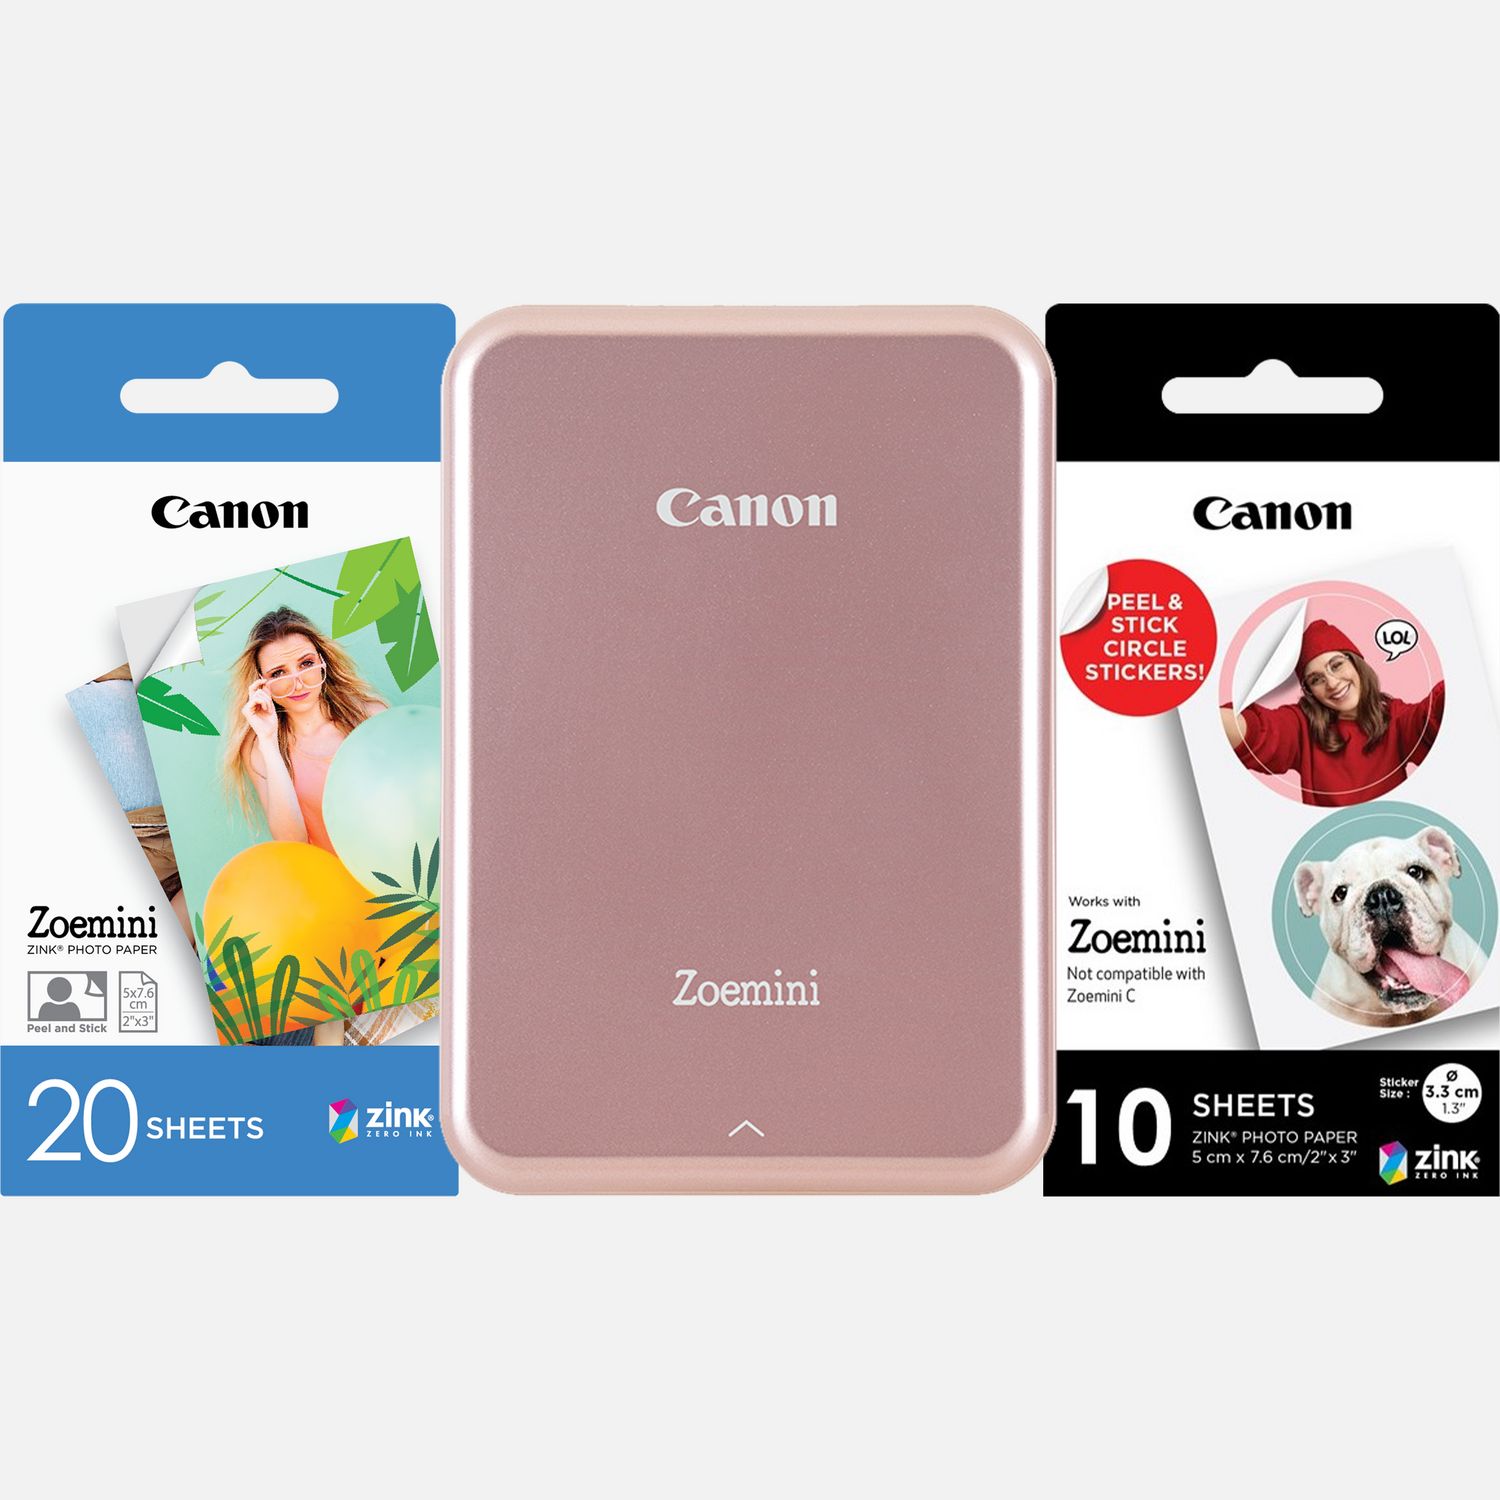 Buy Canon Zoemini 2 Printer with x30 shots paper and Accessories - Rose  Gold & White - UK Stock